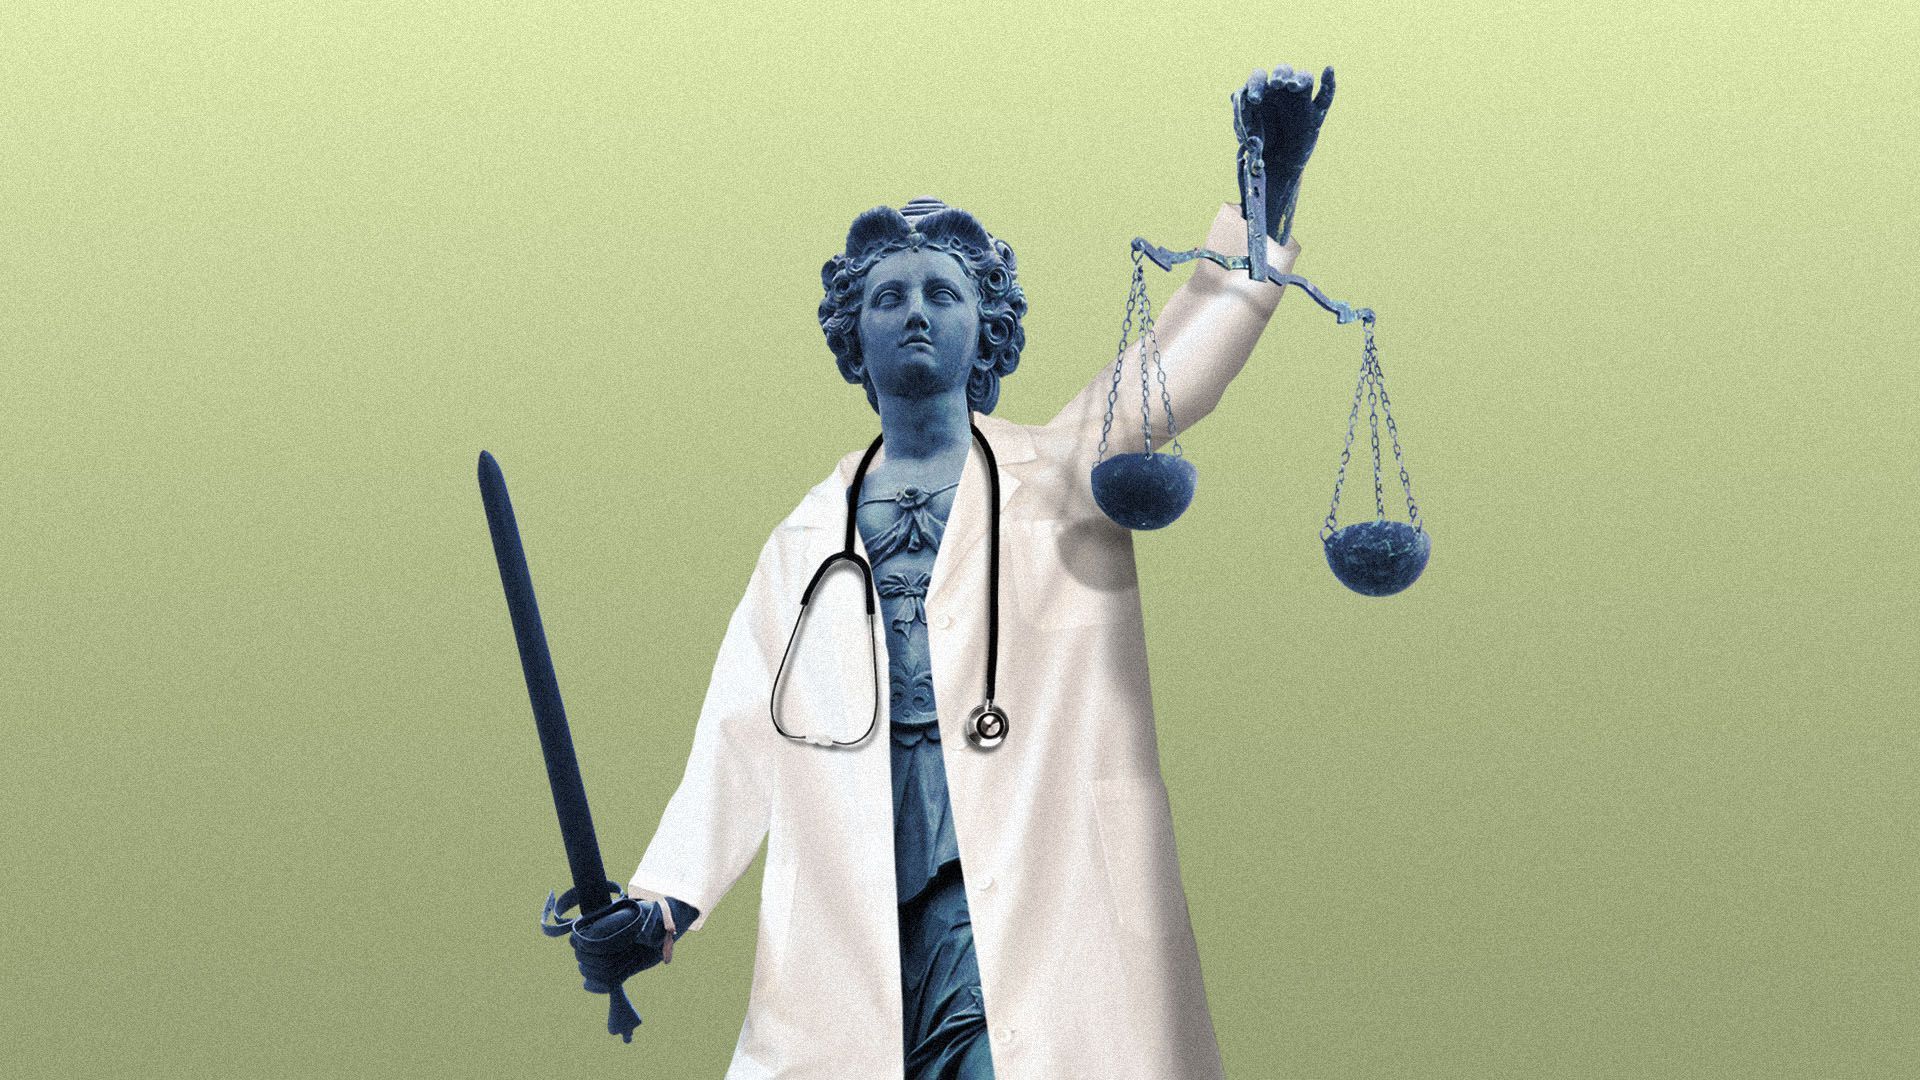 Illustration of Greek statue wearing a medical coat and stethoscope 